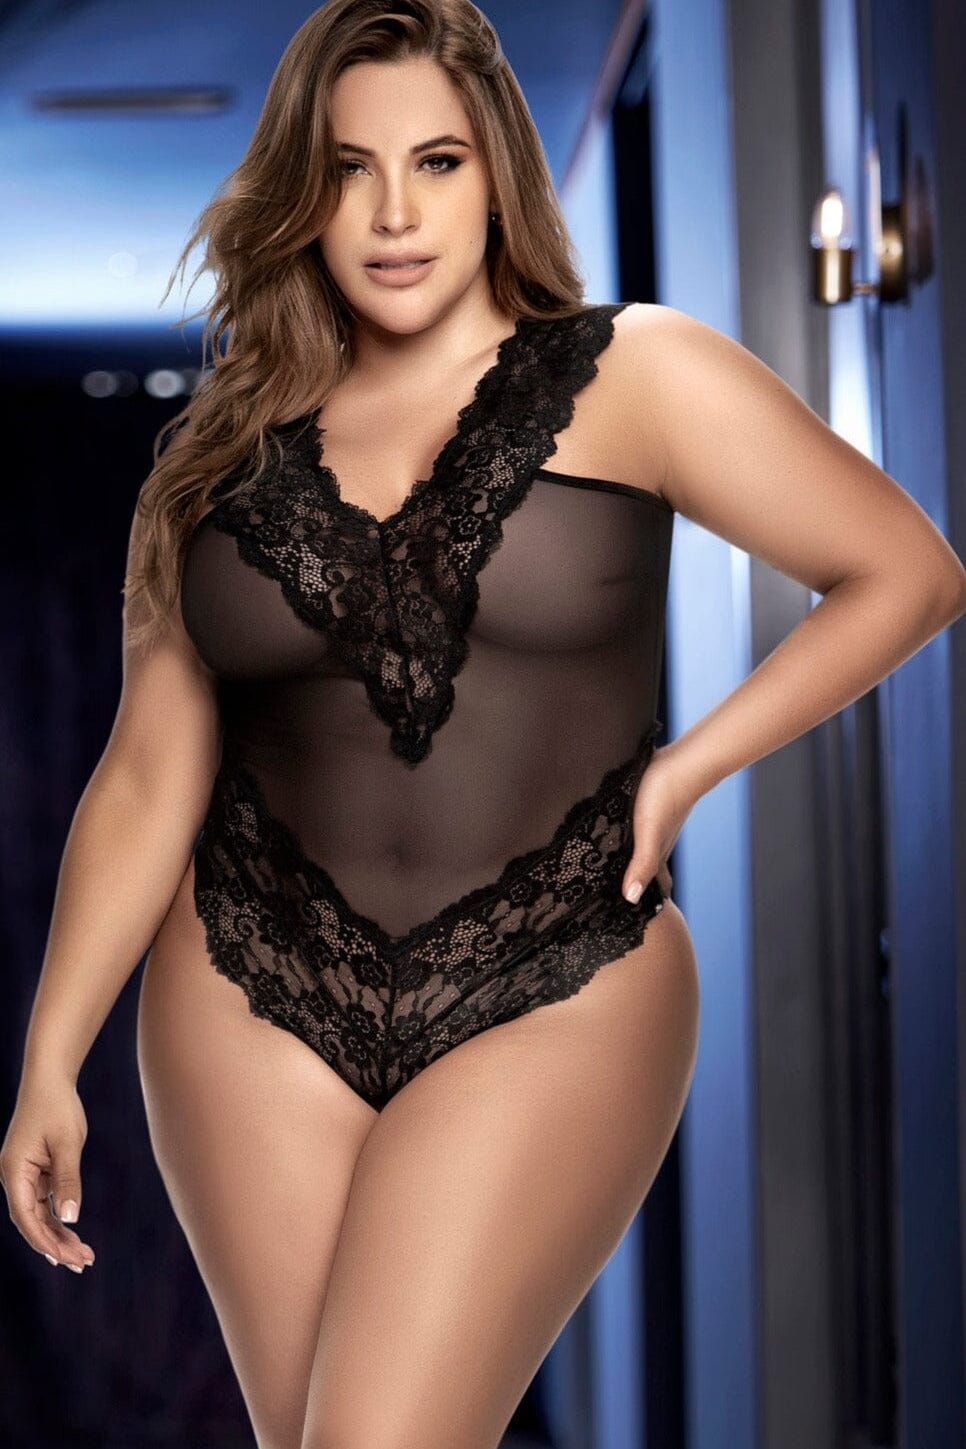 Plus Size Low Cut Nude Teddy, Plus Size Nude and Black Teddy